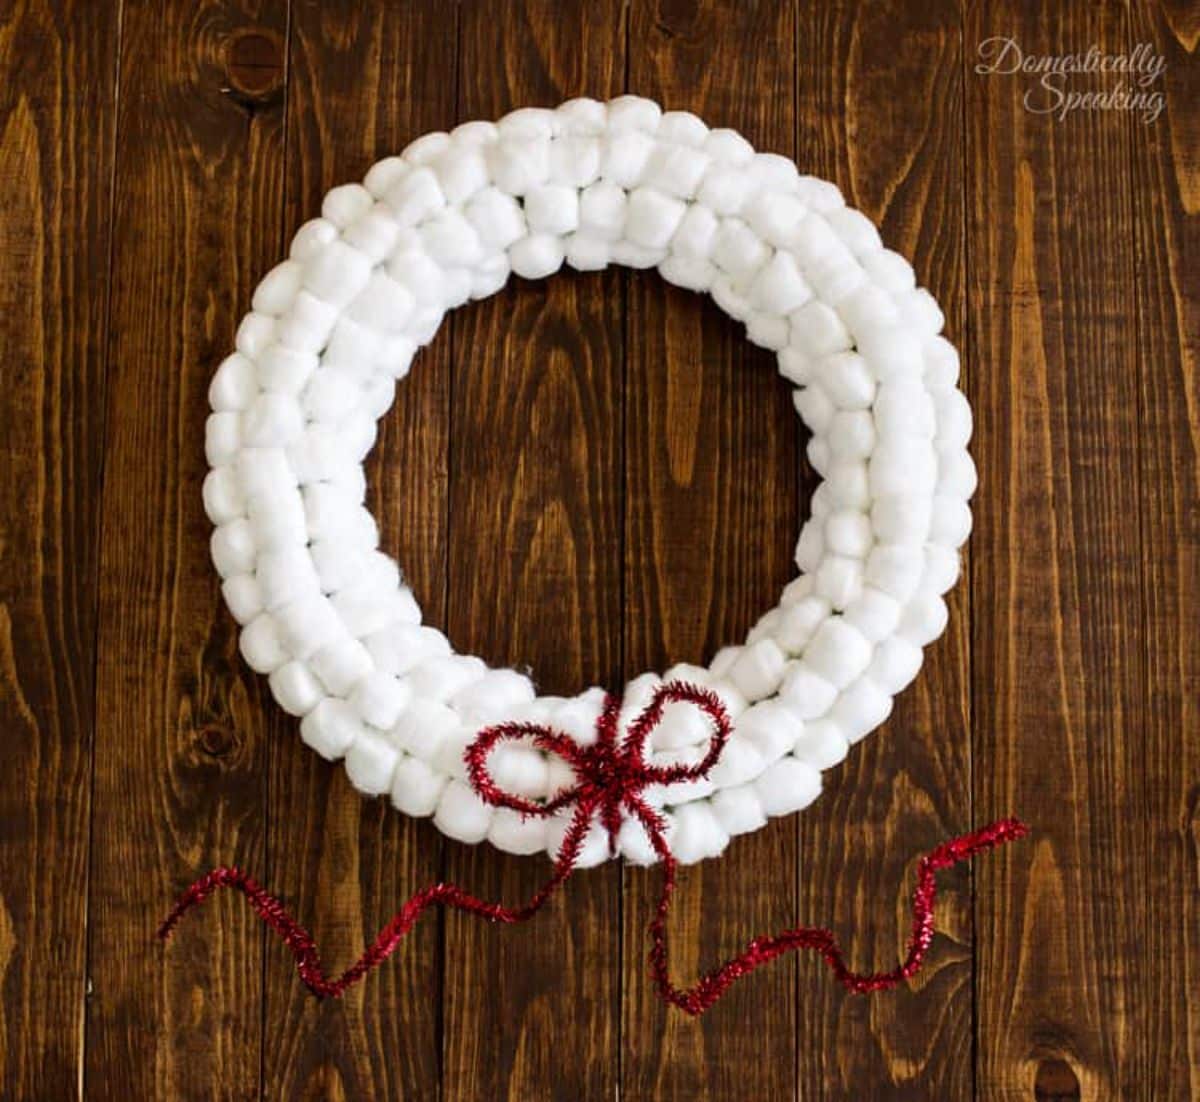 Easy Snowball Wreath with Cotton Balls